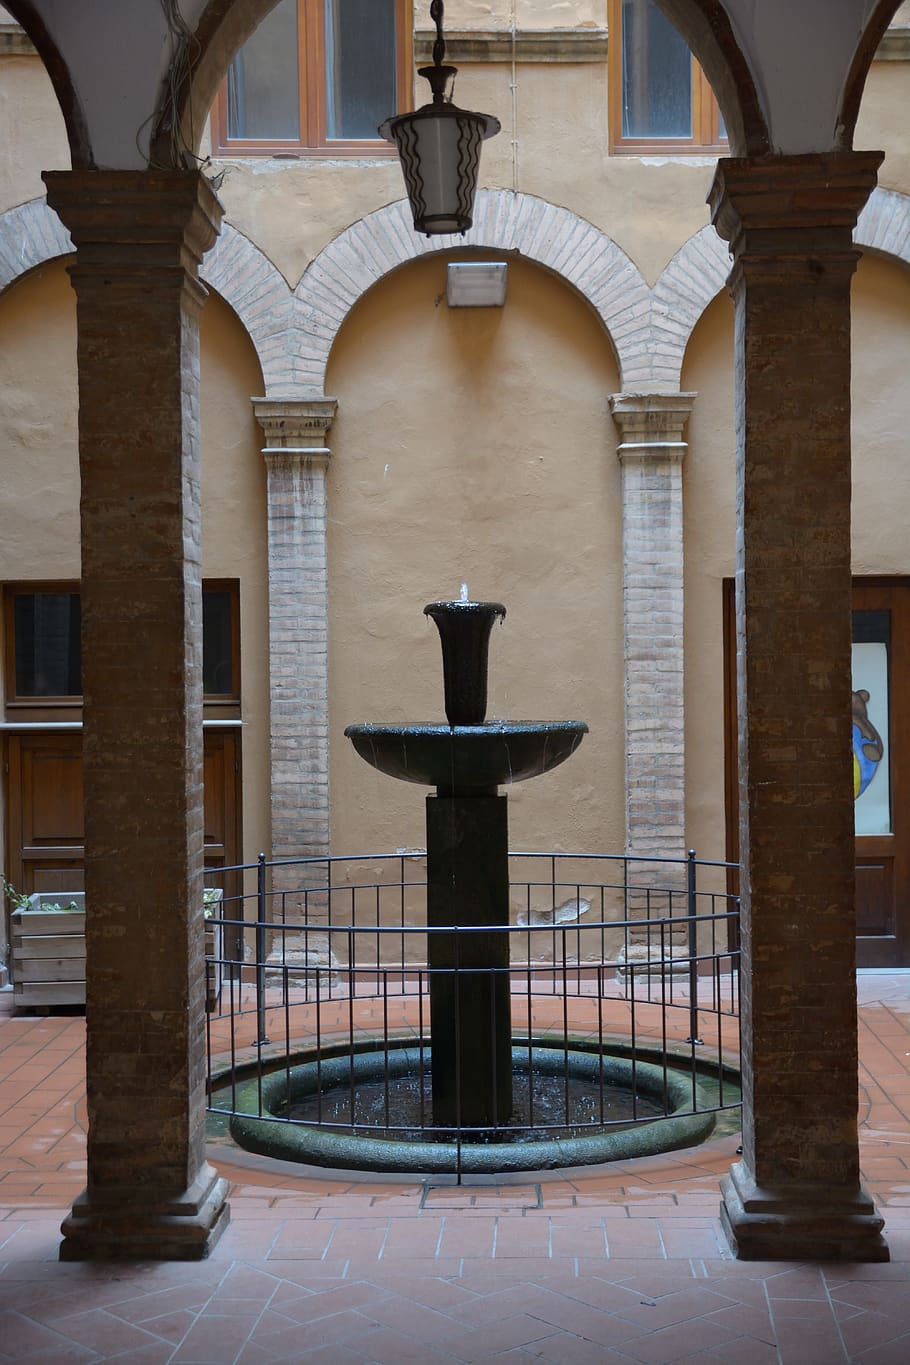 italy, volterra, fountain, courtyard, architecture, built structure